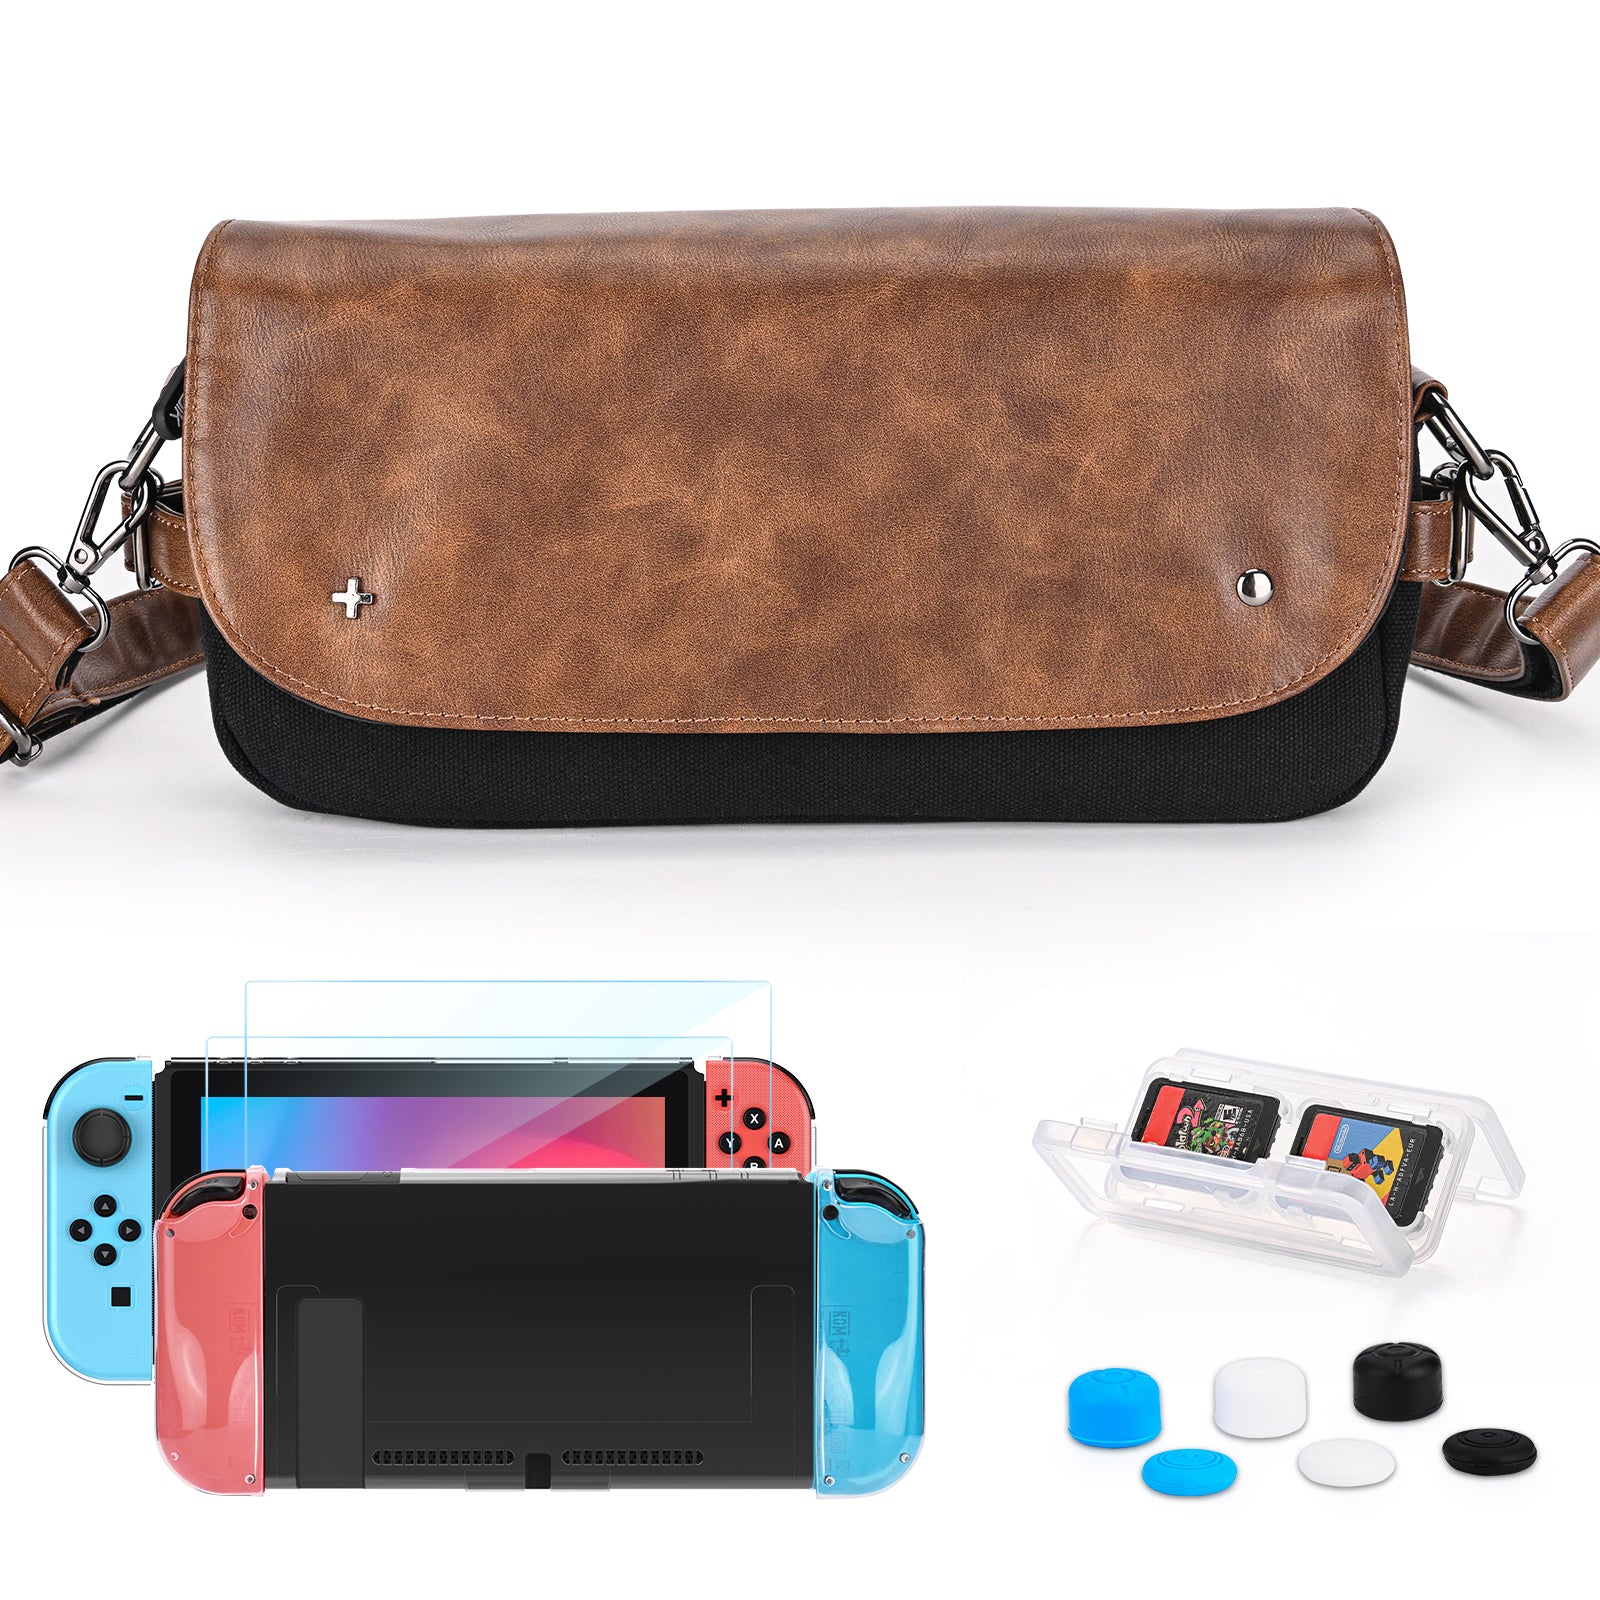 Switch Sling Bag, Carrying Case for Nintendo Switch